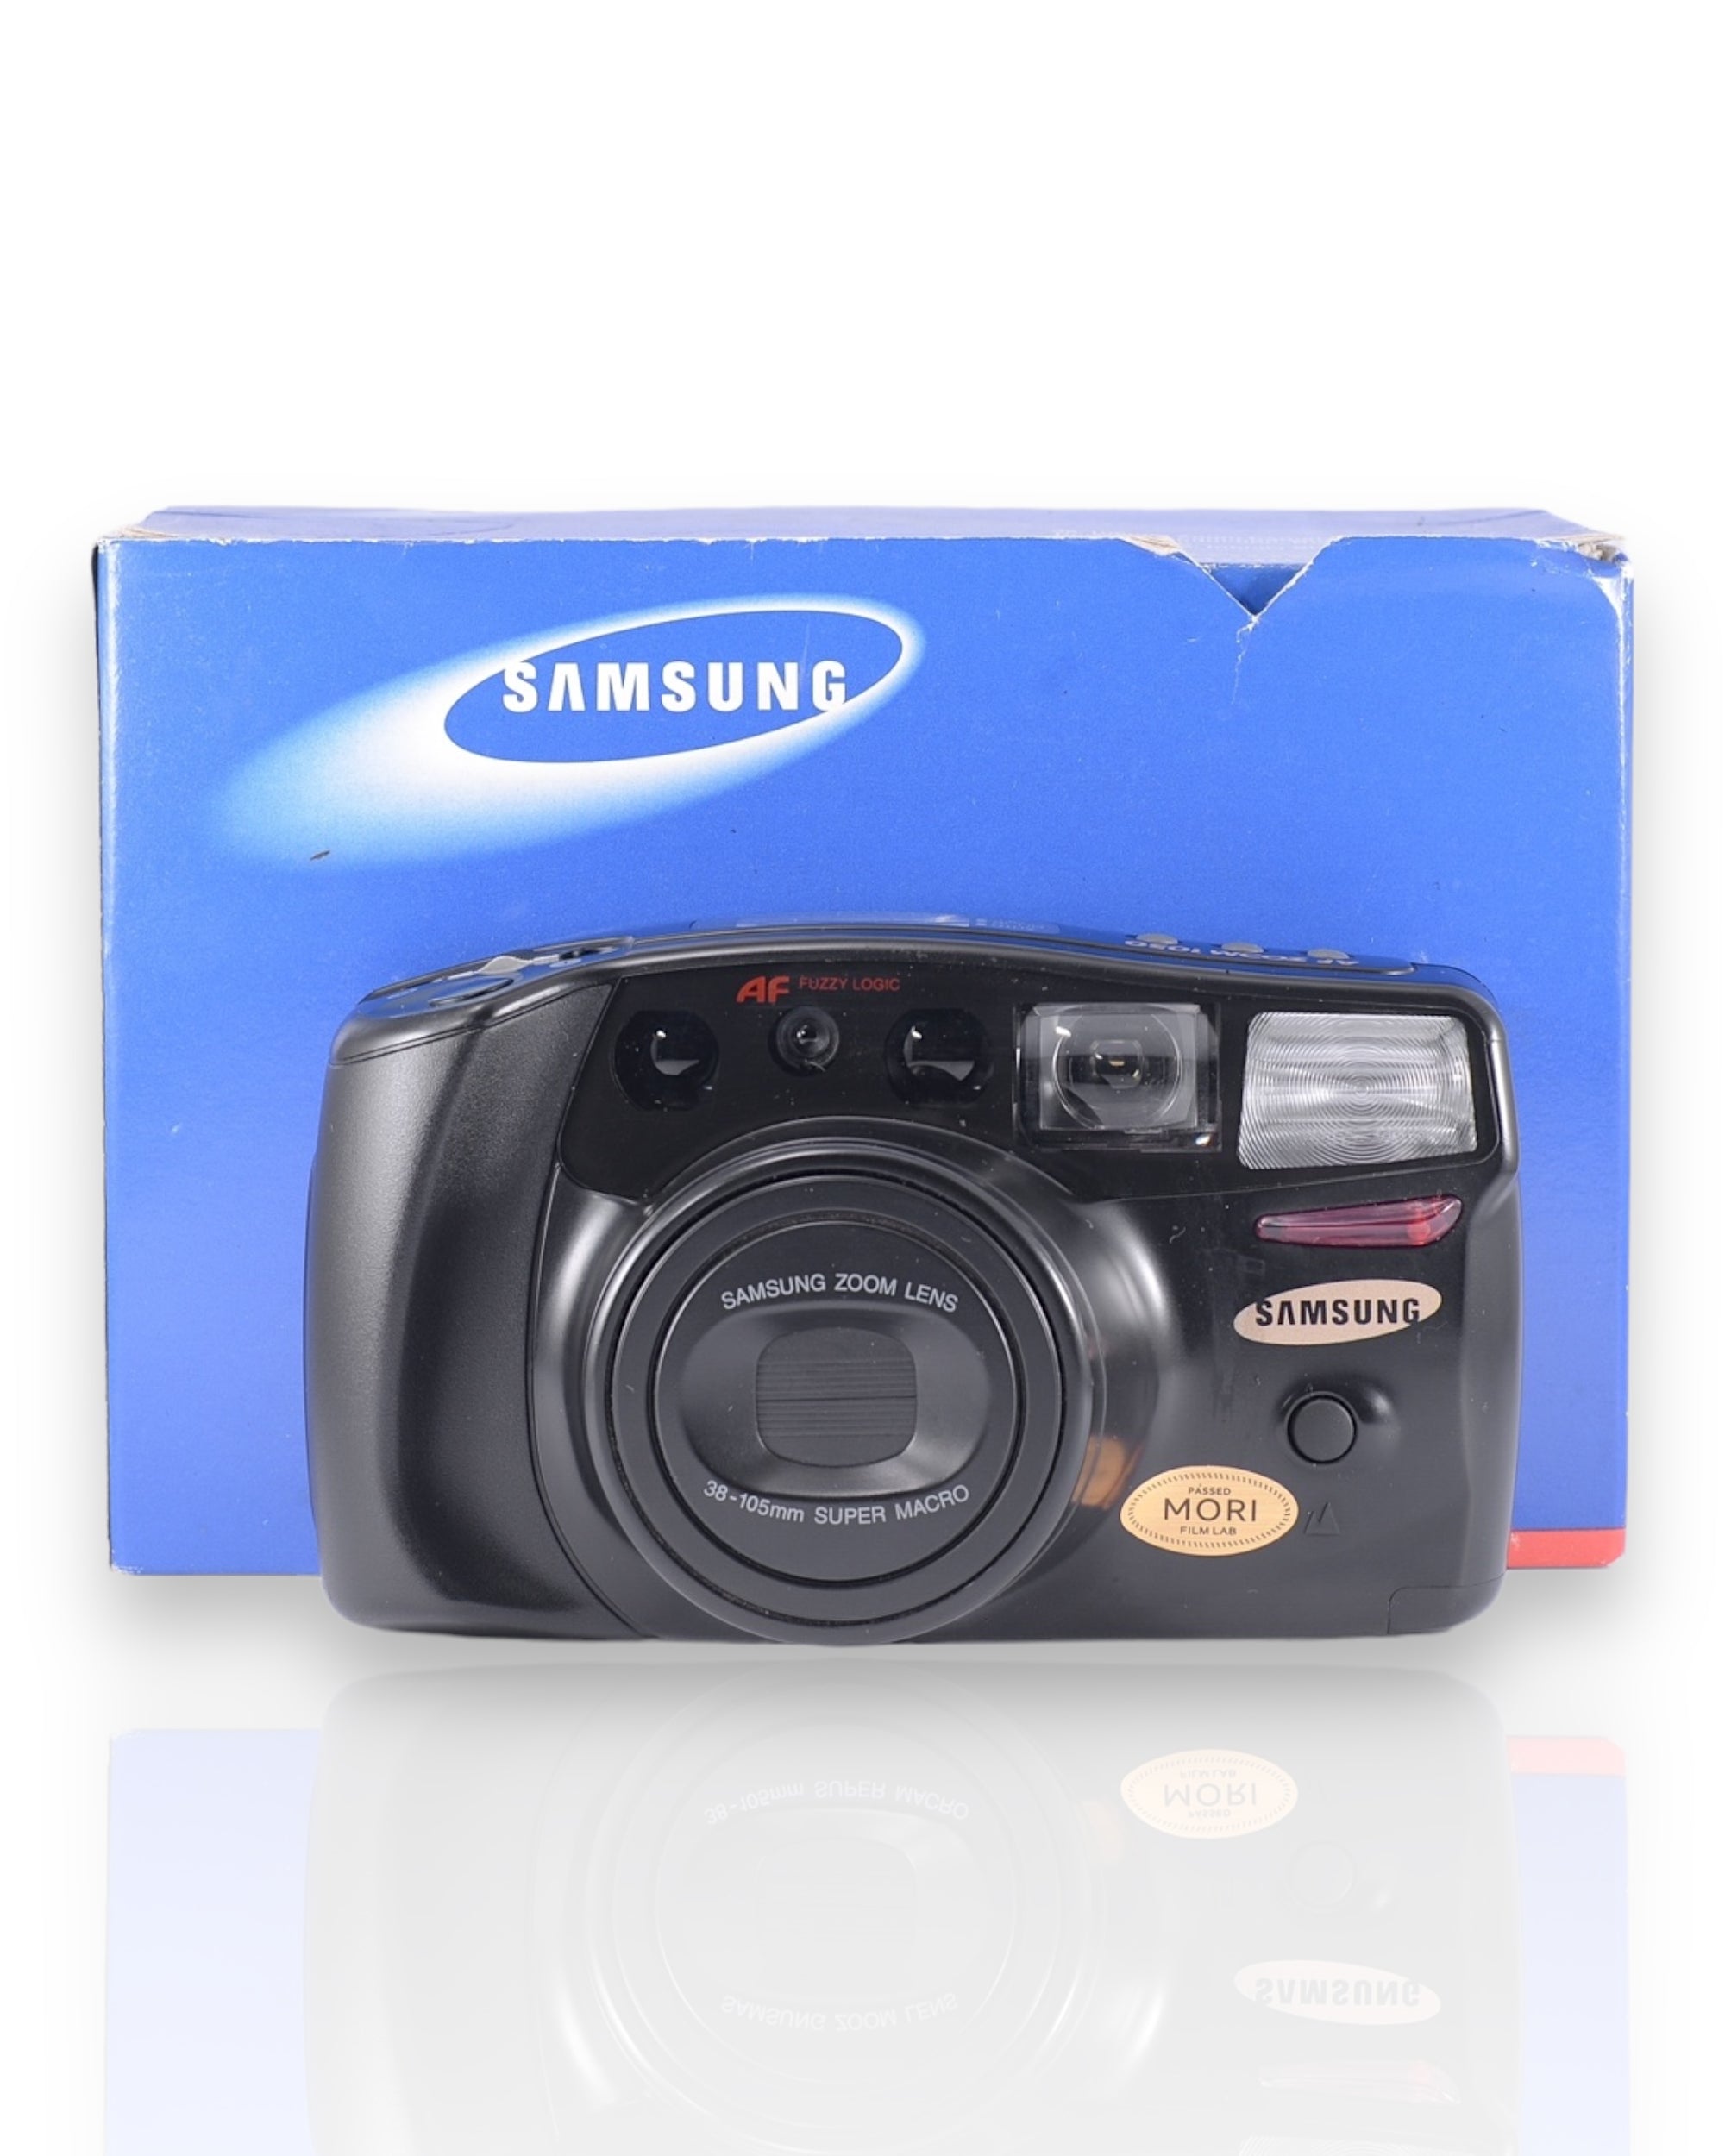 Boxed Samsung AF Zoom 1050 35mm Point & Shoot film camera with 38-105mm macro zoom lens